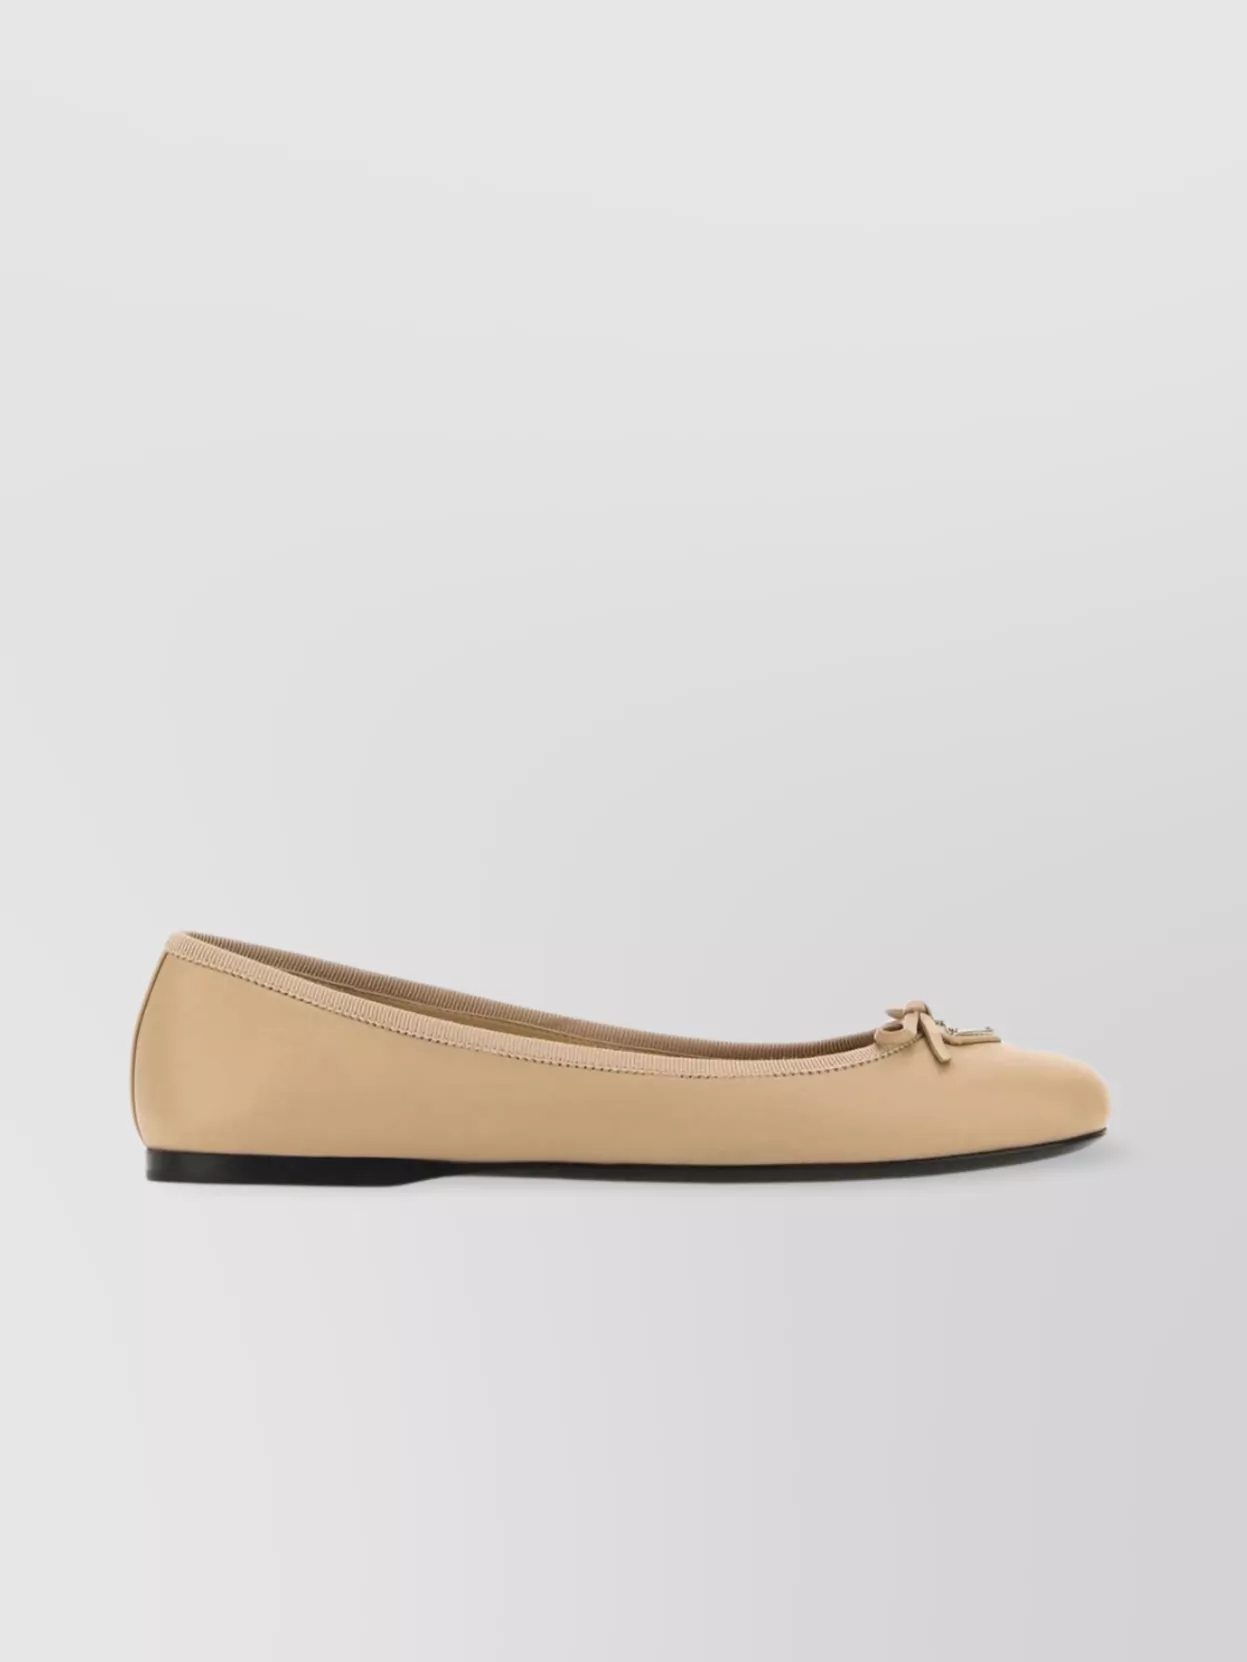 Shop Prada Nappa Leather Ballet Flats Featuring Bow In Beige